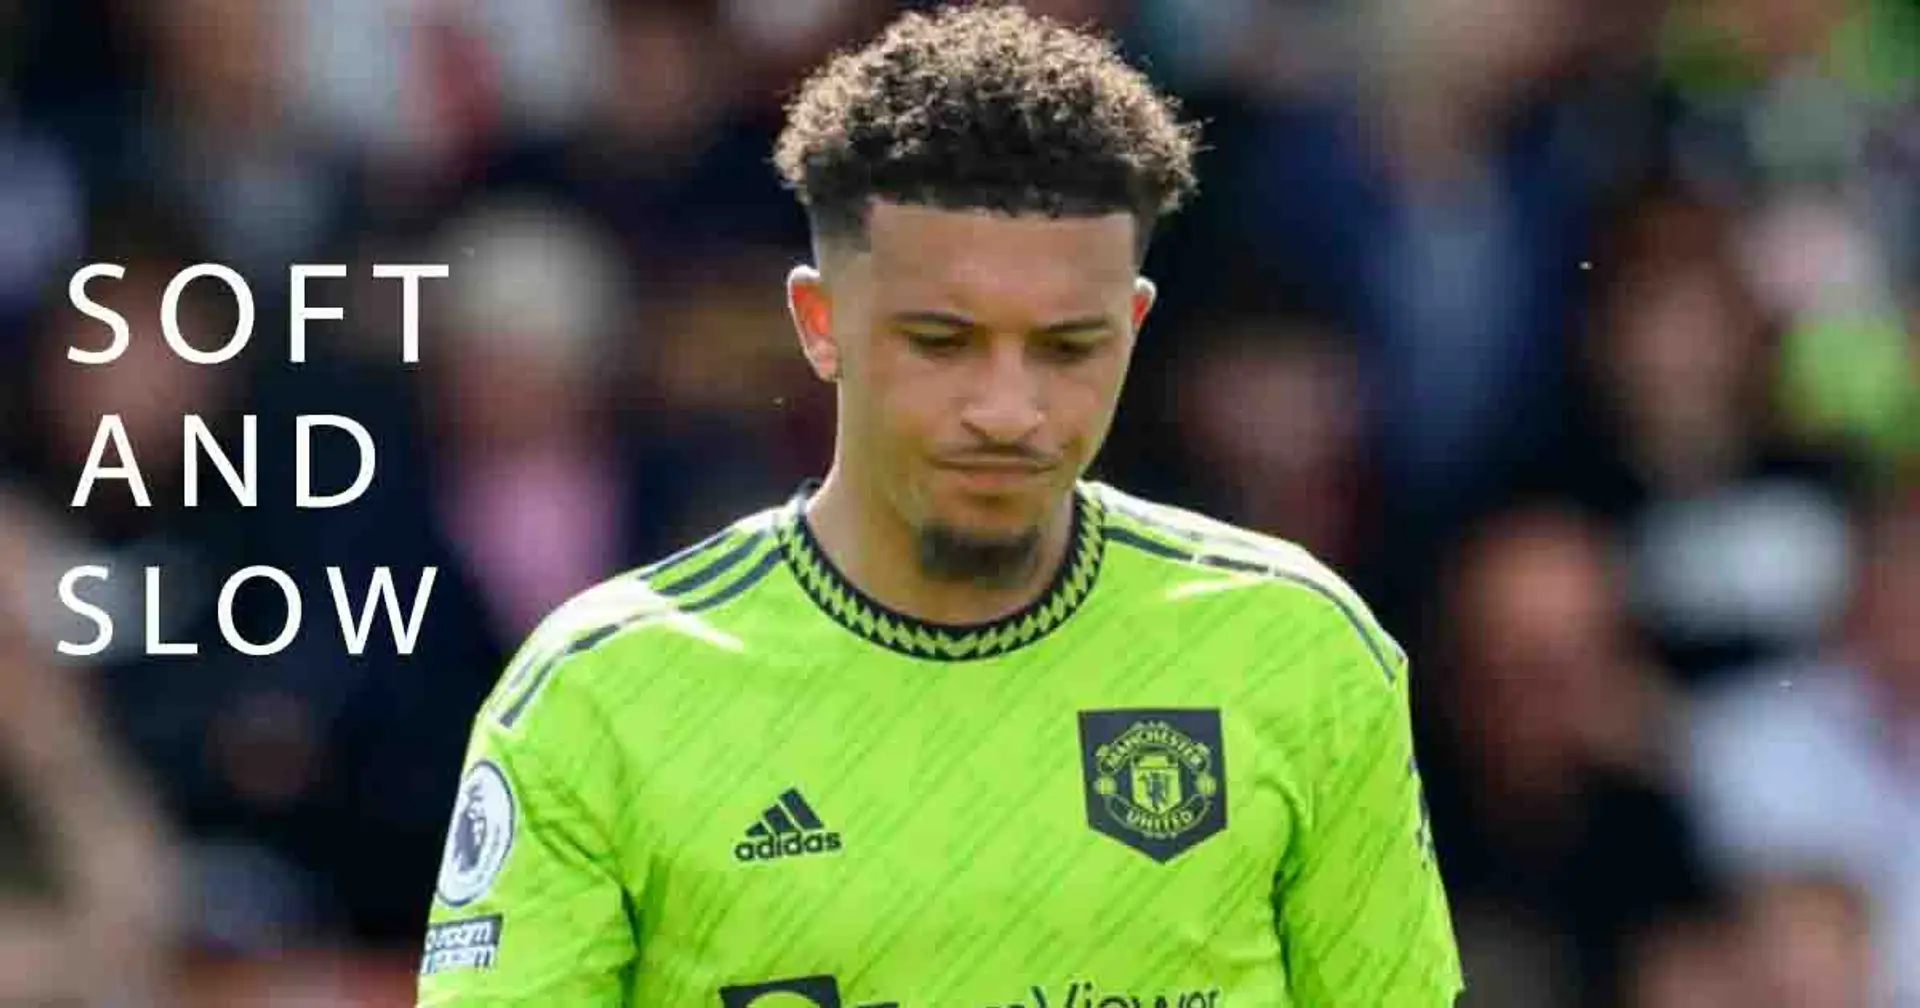 'I expect better': Man United fans have mixed opinions on Sancho after Bournemouth display